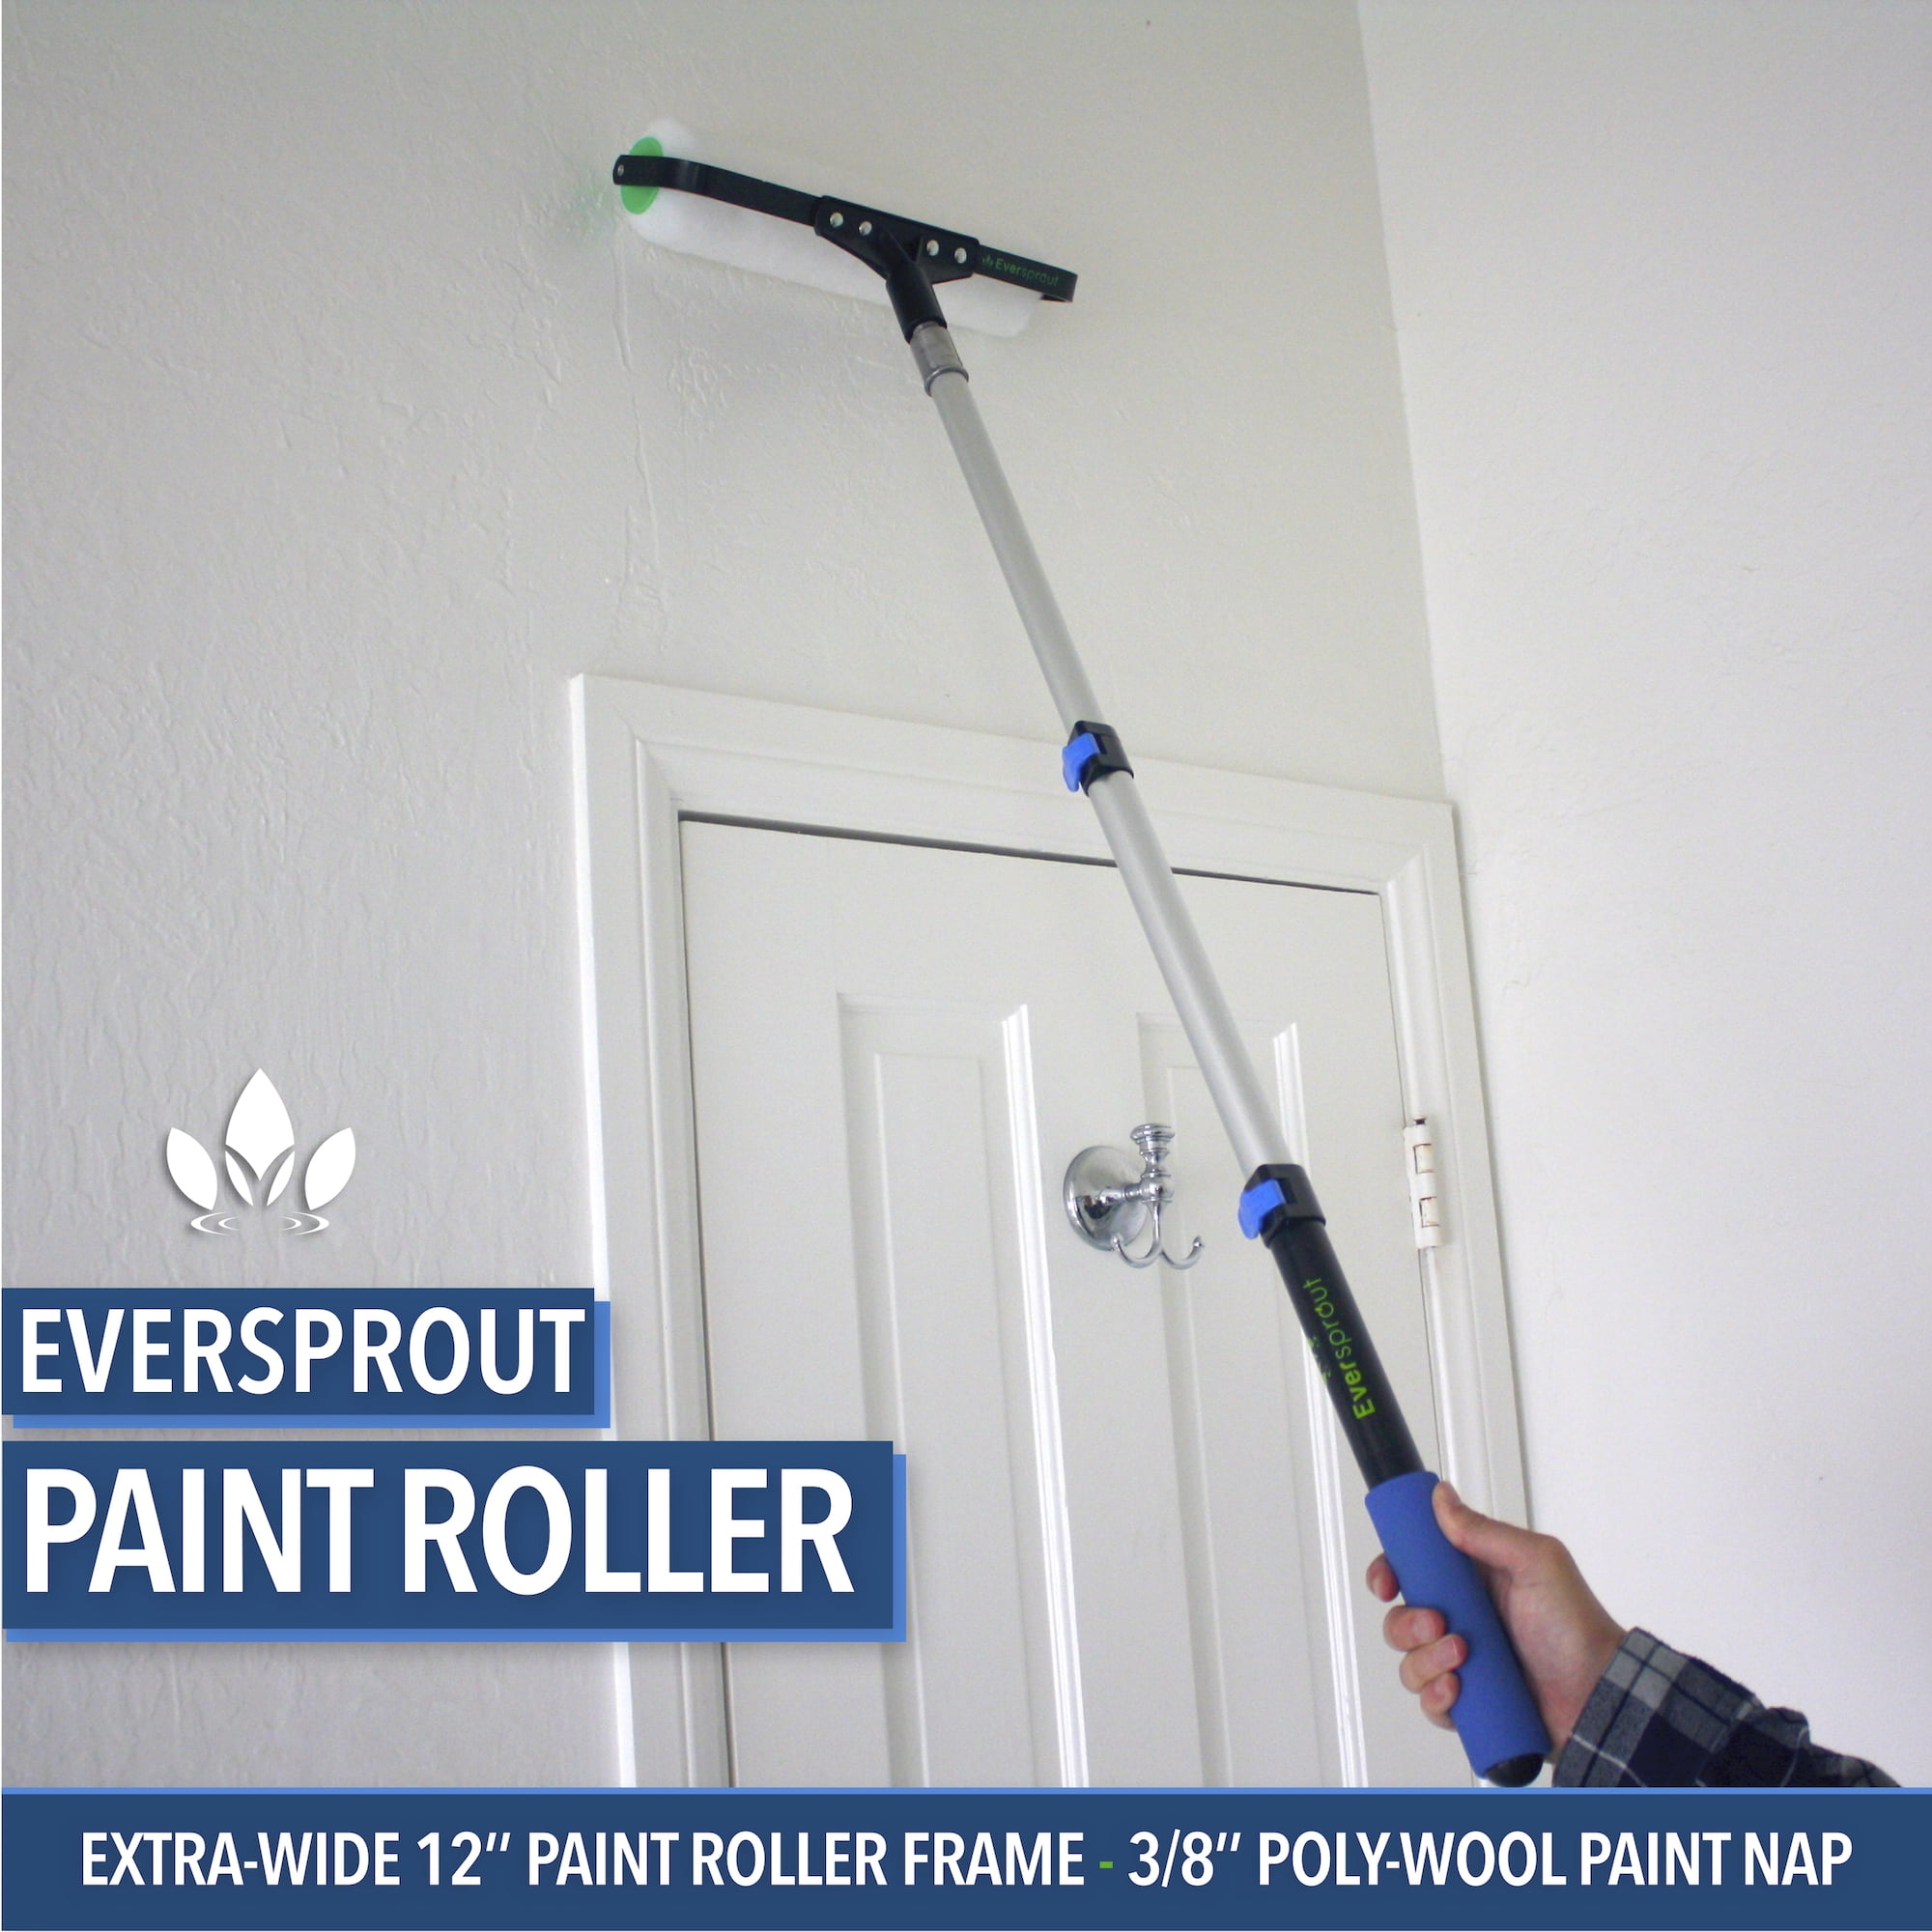 EVERSPROUT 1.5-to-3.5 Foot Paint Roller Kit